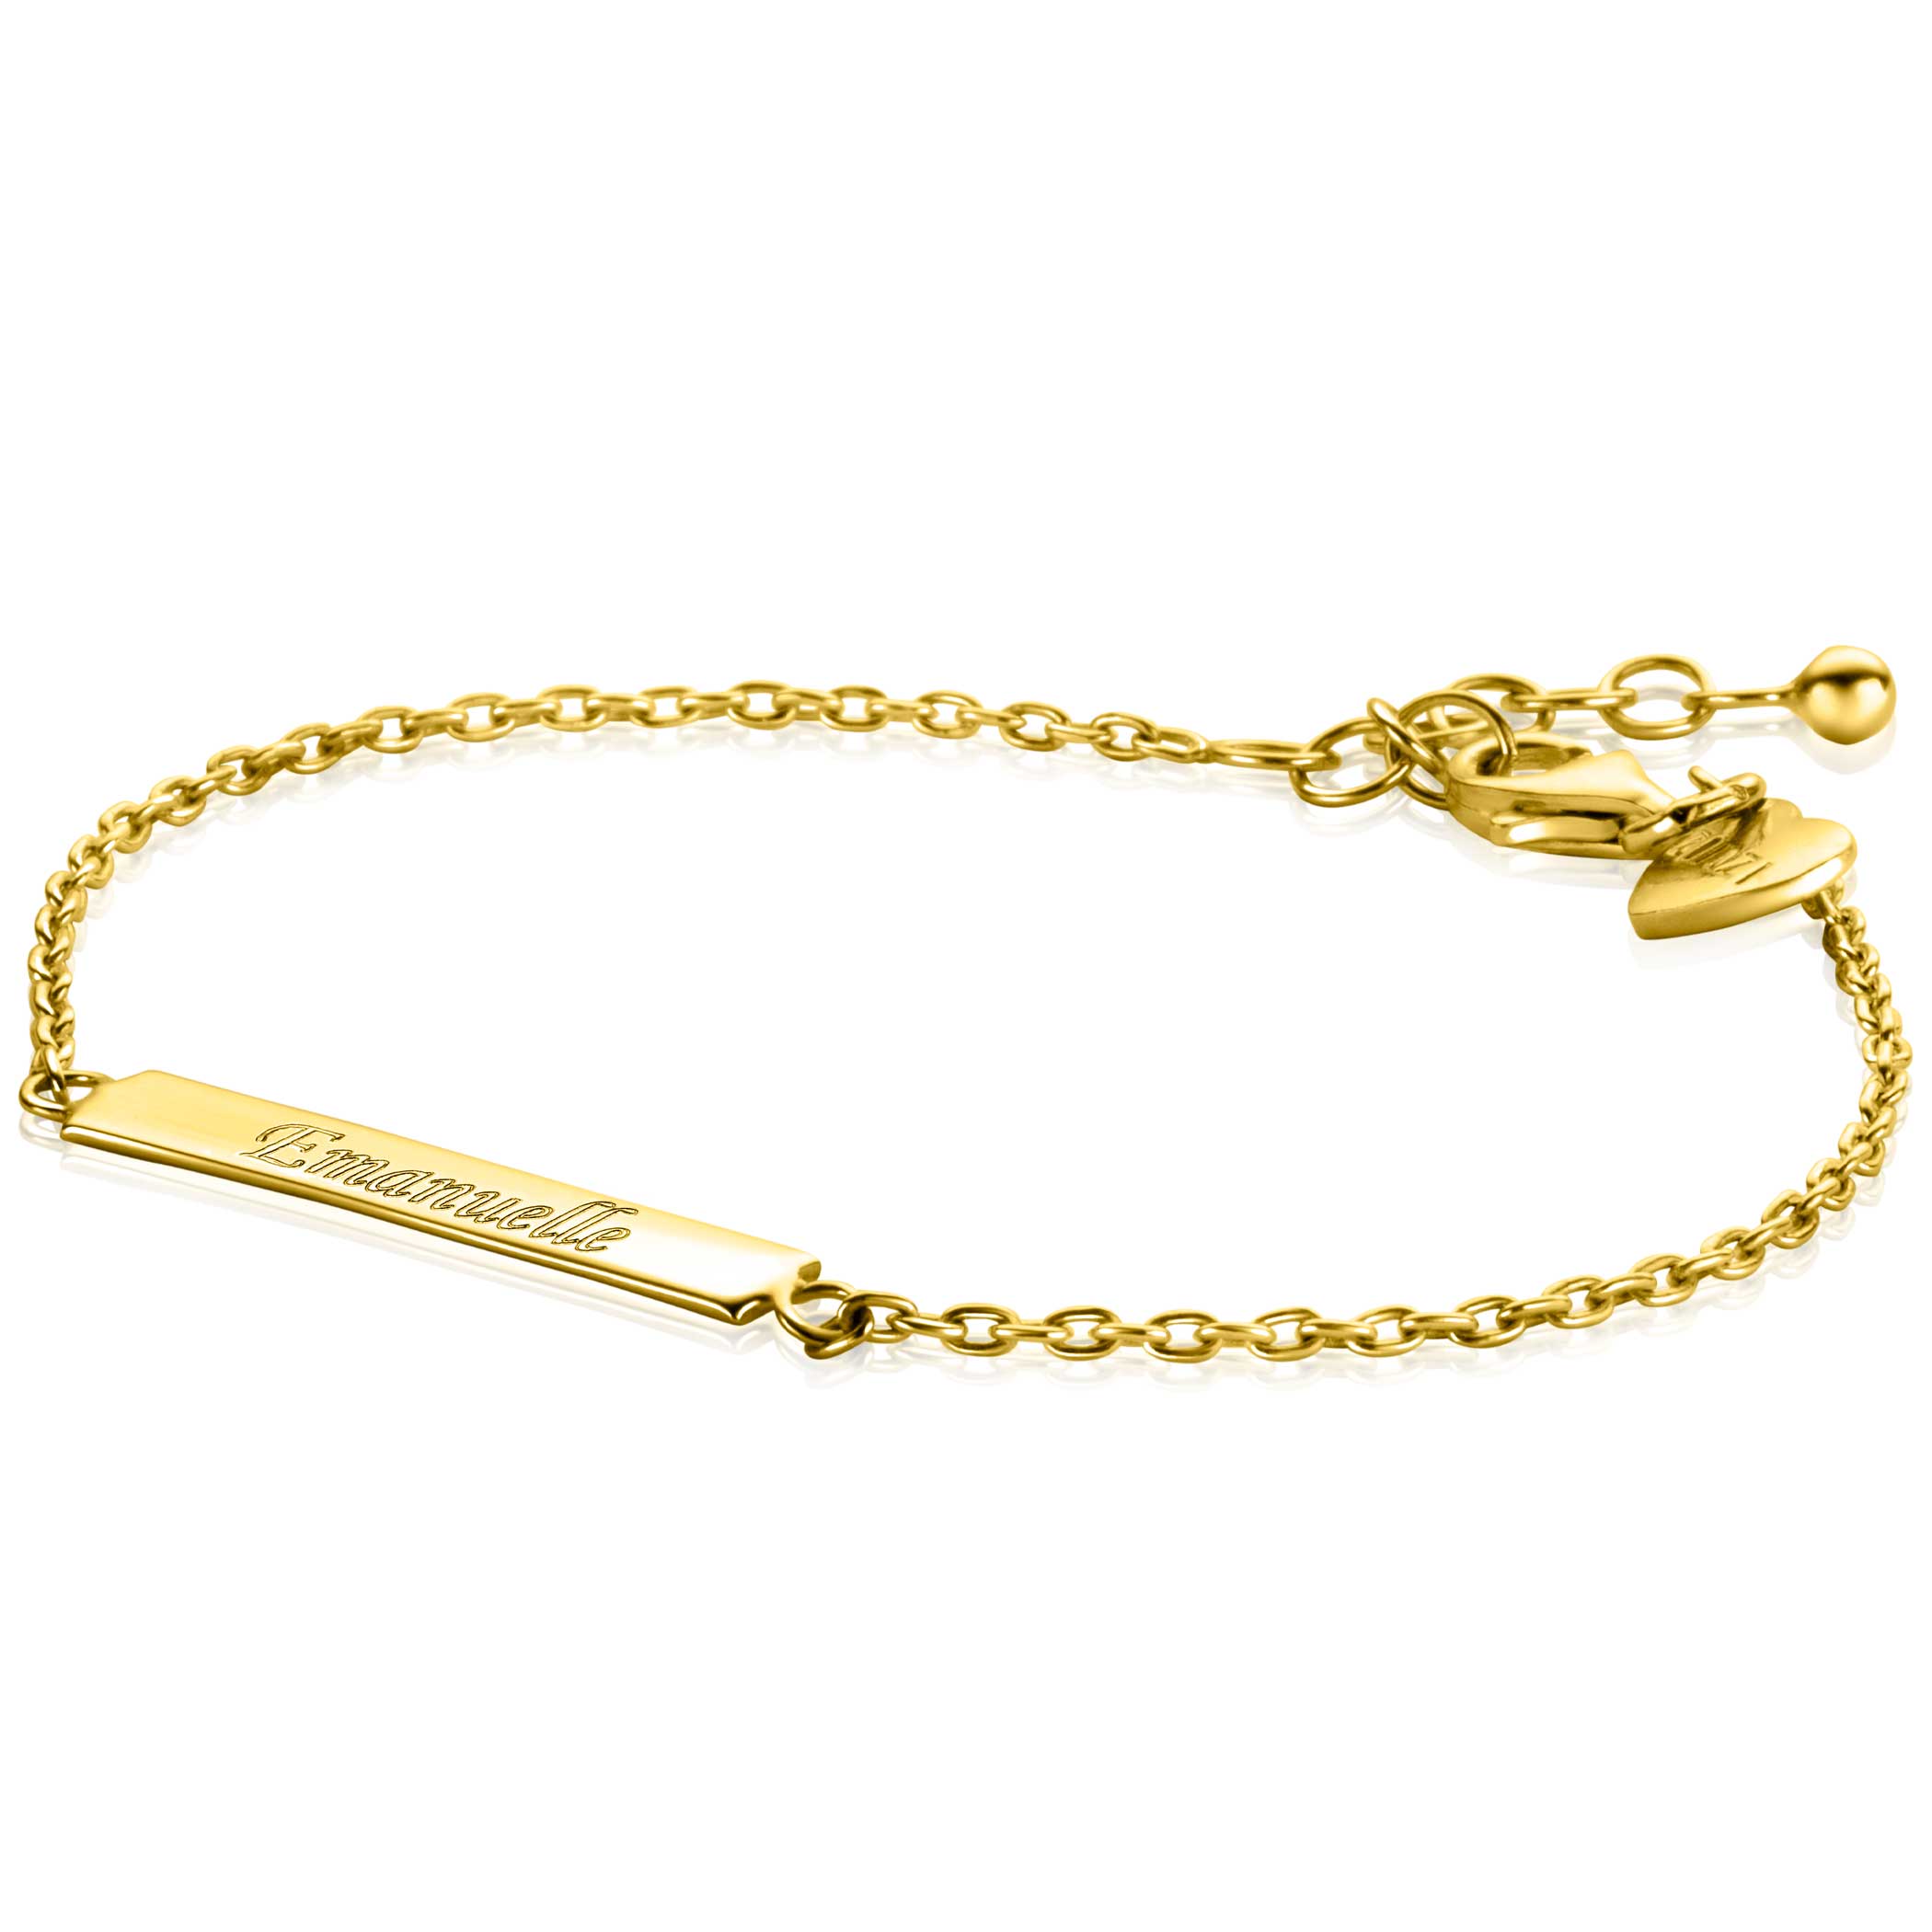 ZINZI Gold Plated Sterling Silver Bracelet with Shiny Plate for Engraving 17-20cm ZIA2344G